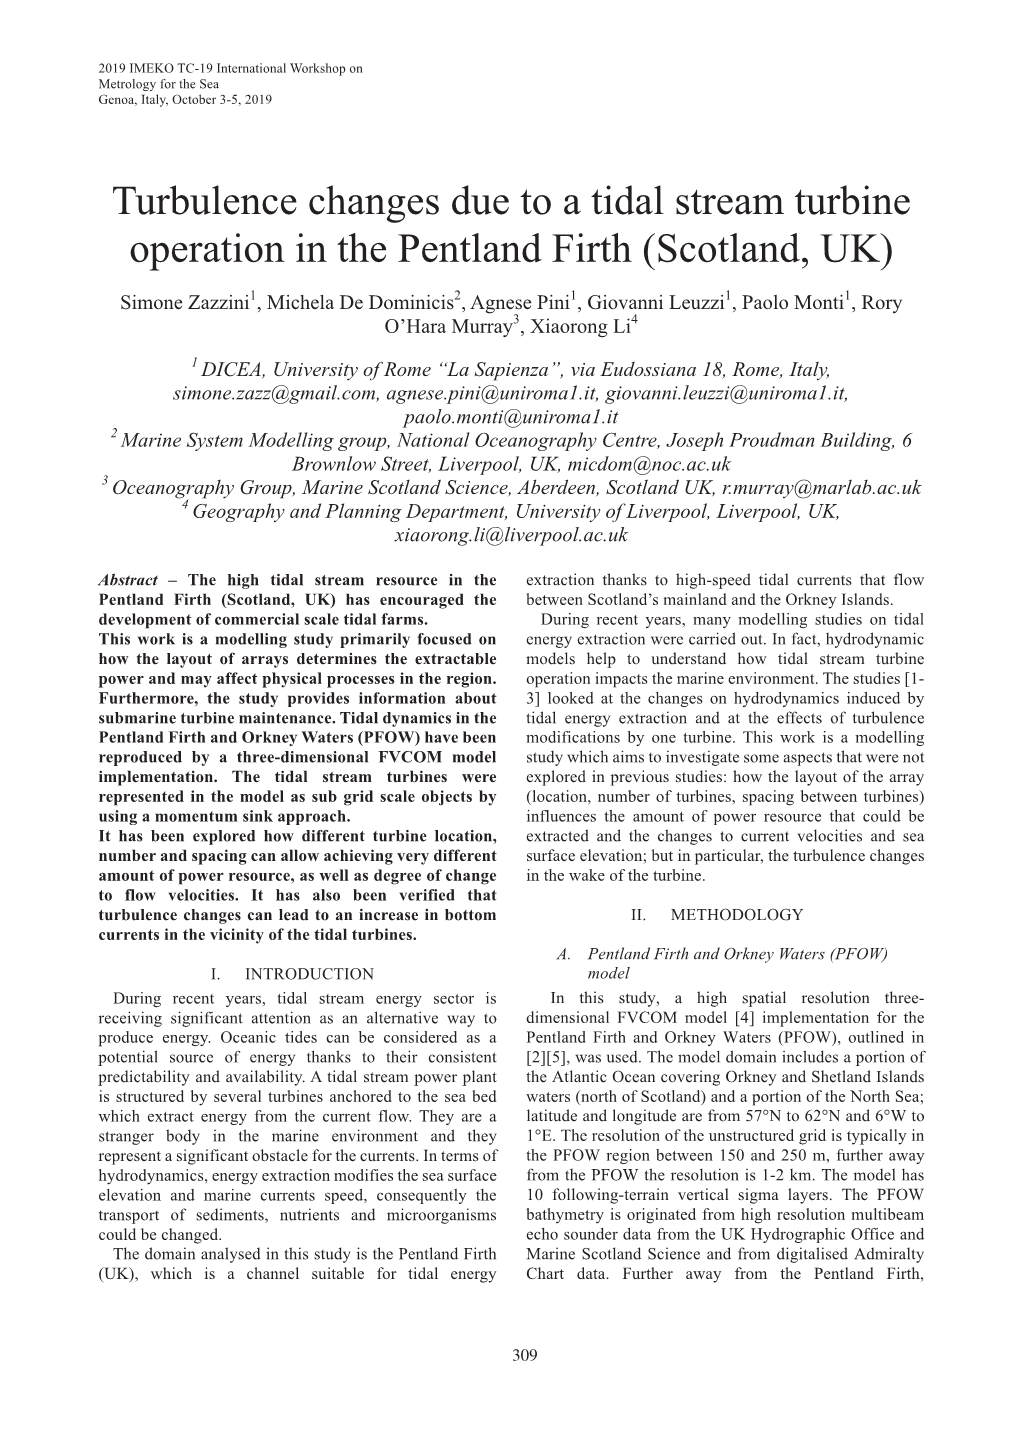 Turbulence Changes Due to a Tidal Stream Turbine Operation in the Pentland Firth (Scotland, UK)